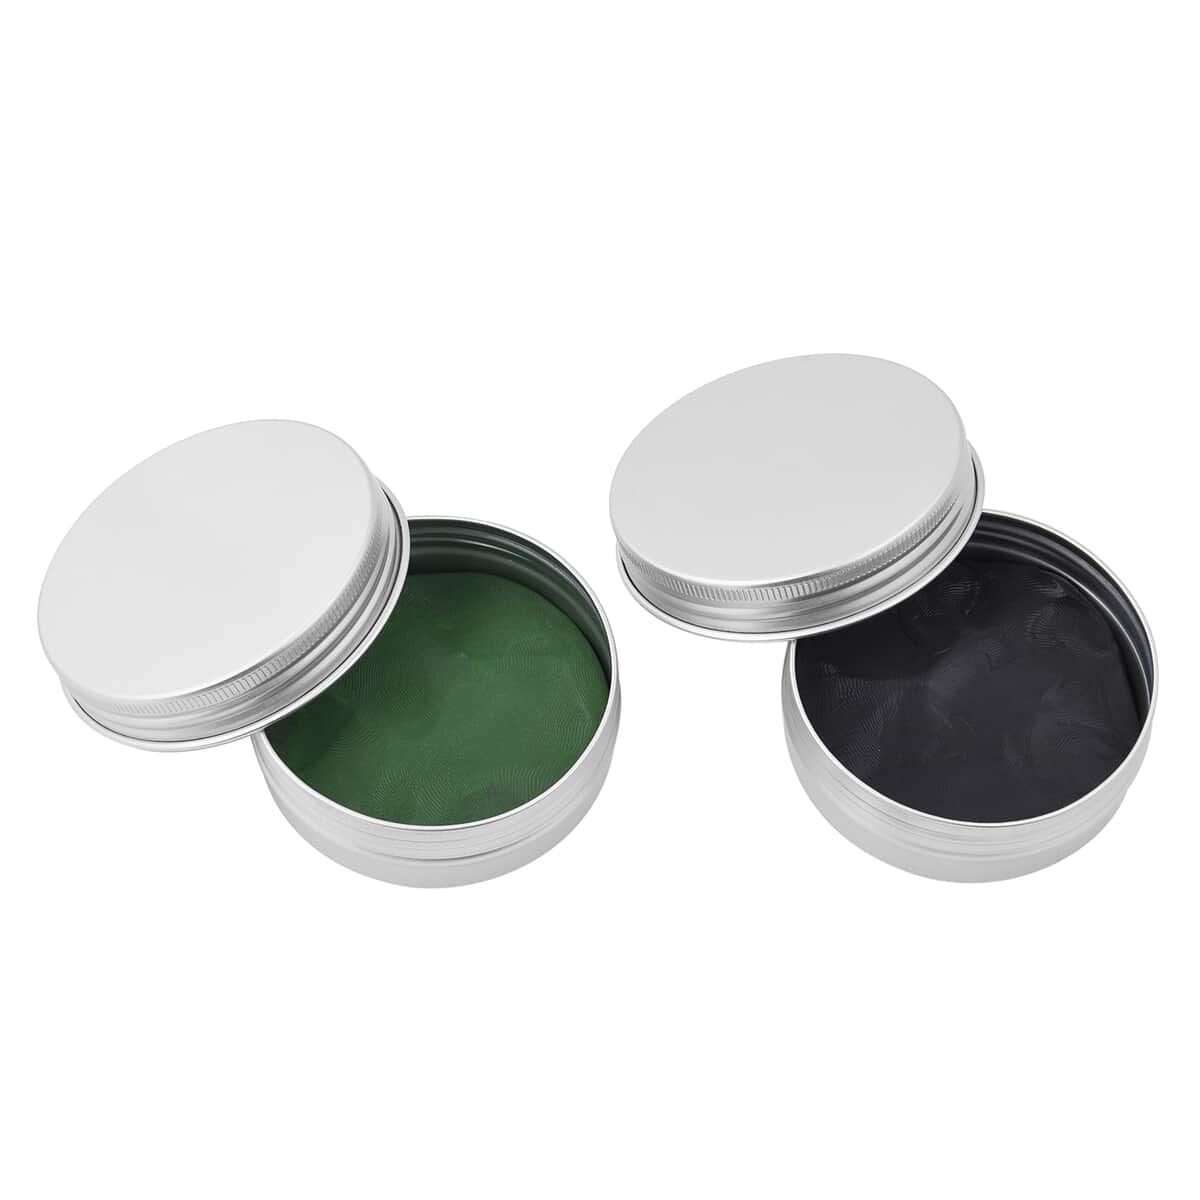 Set of 2 Black and Green Magnetic Putty (2.56"x2.56") image number 0